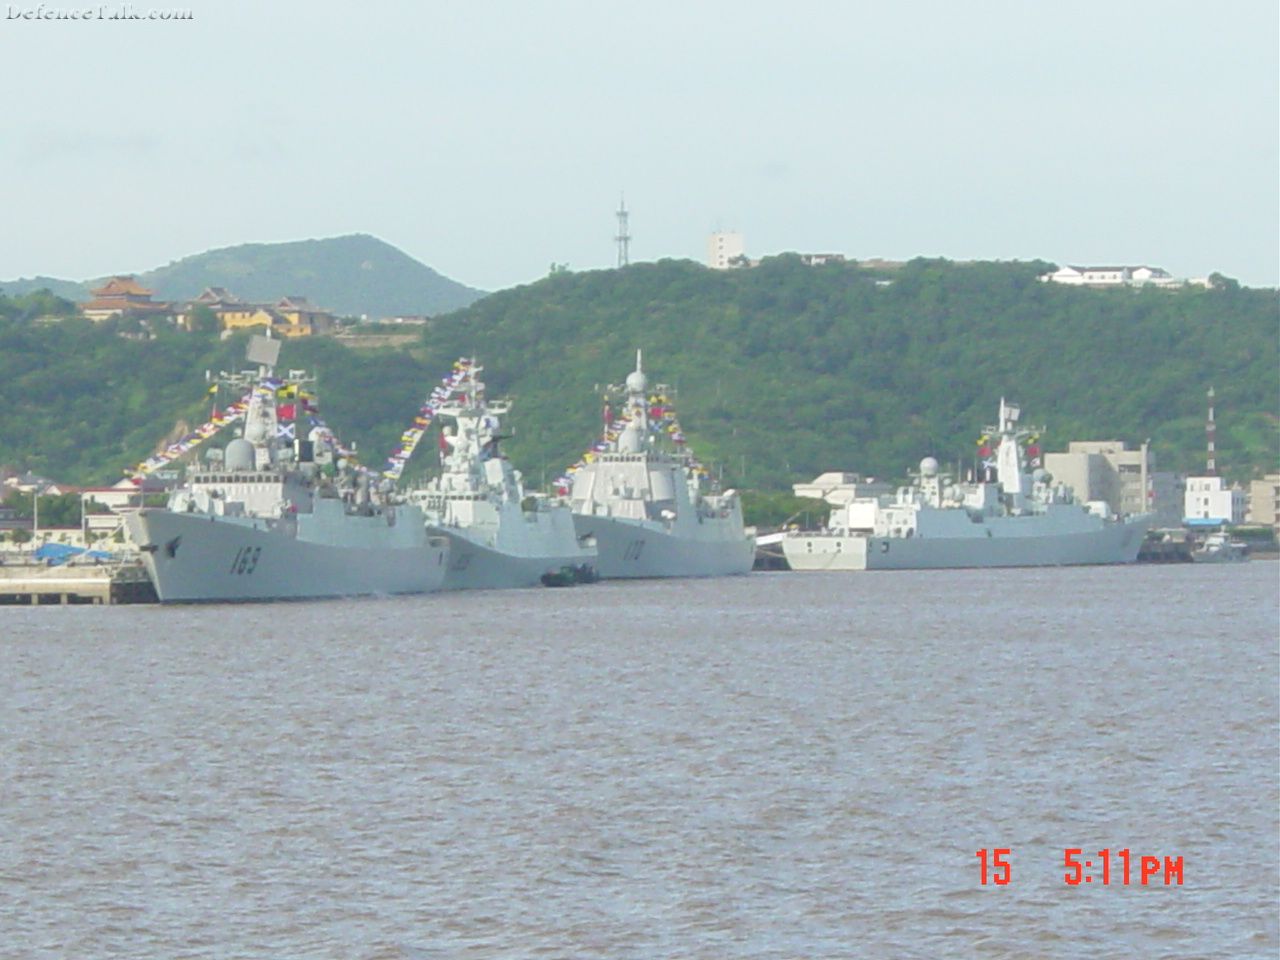 052B, 052C DDG and 054 FFG in harbor